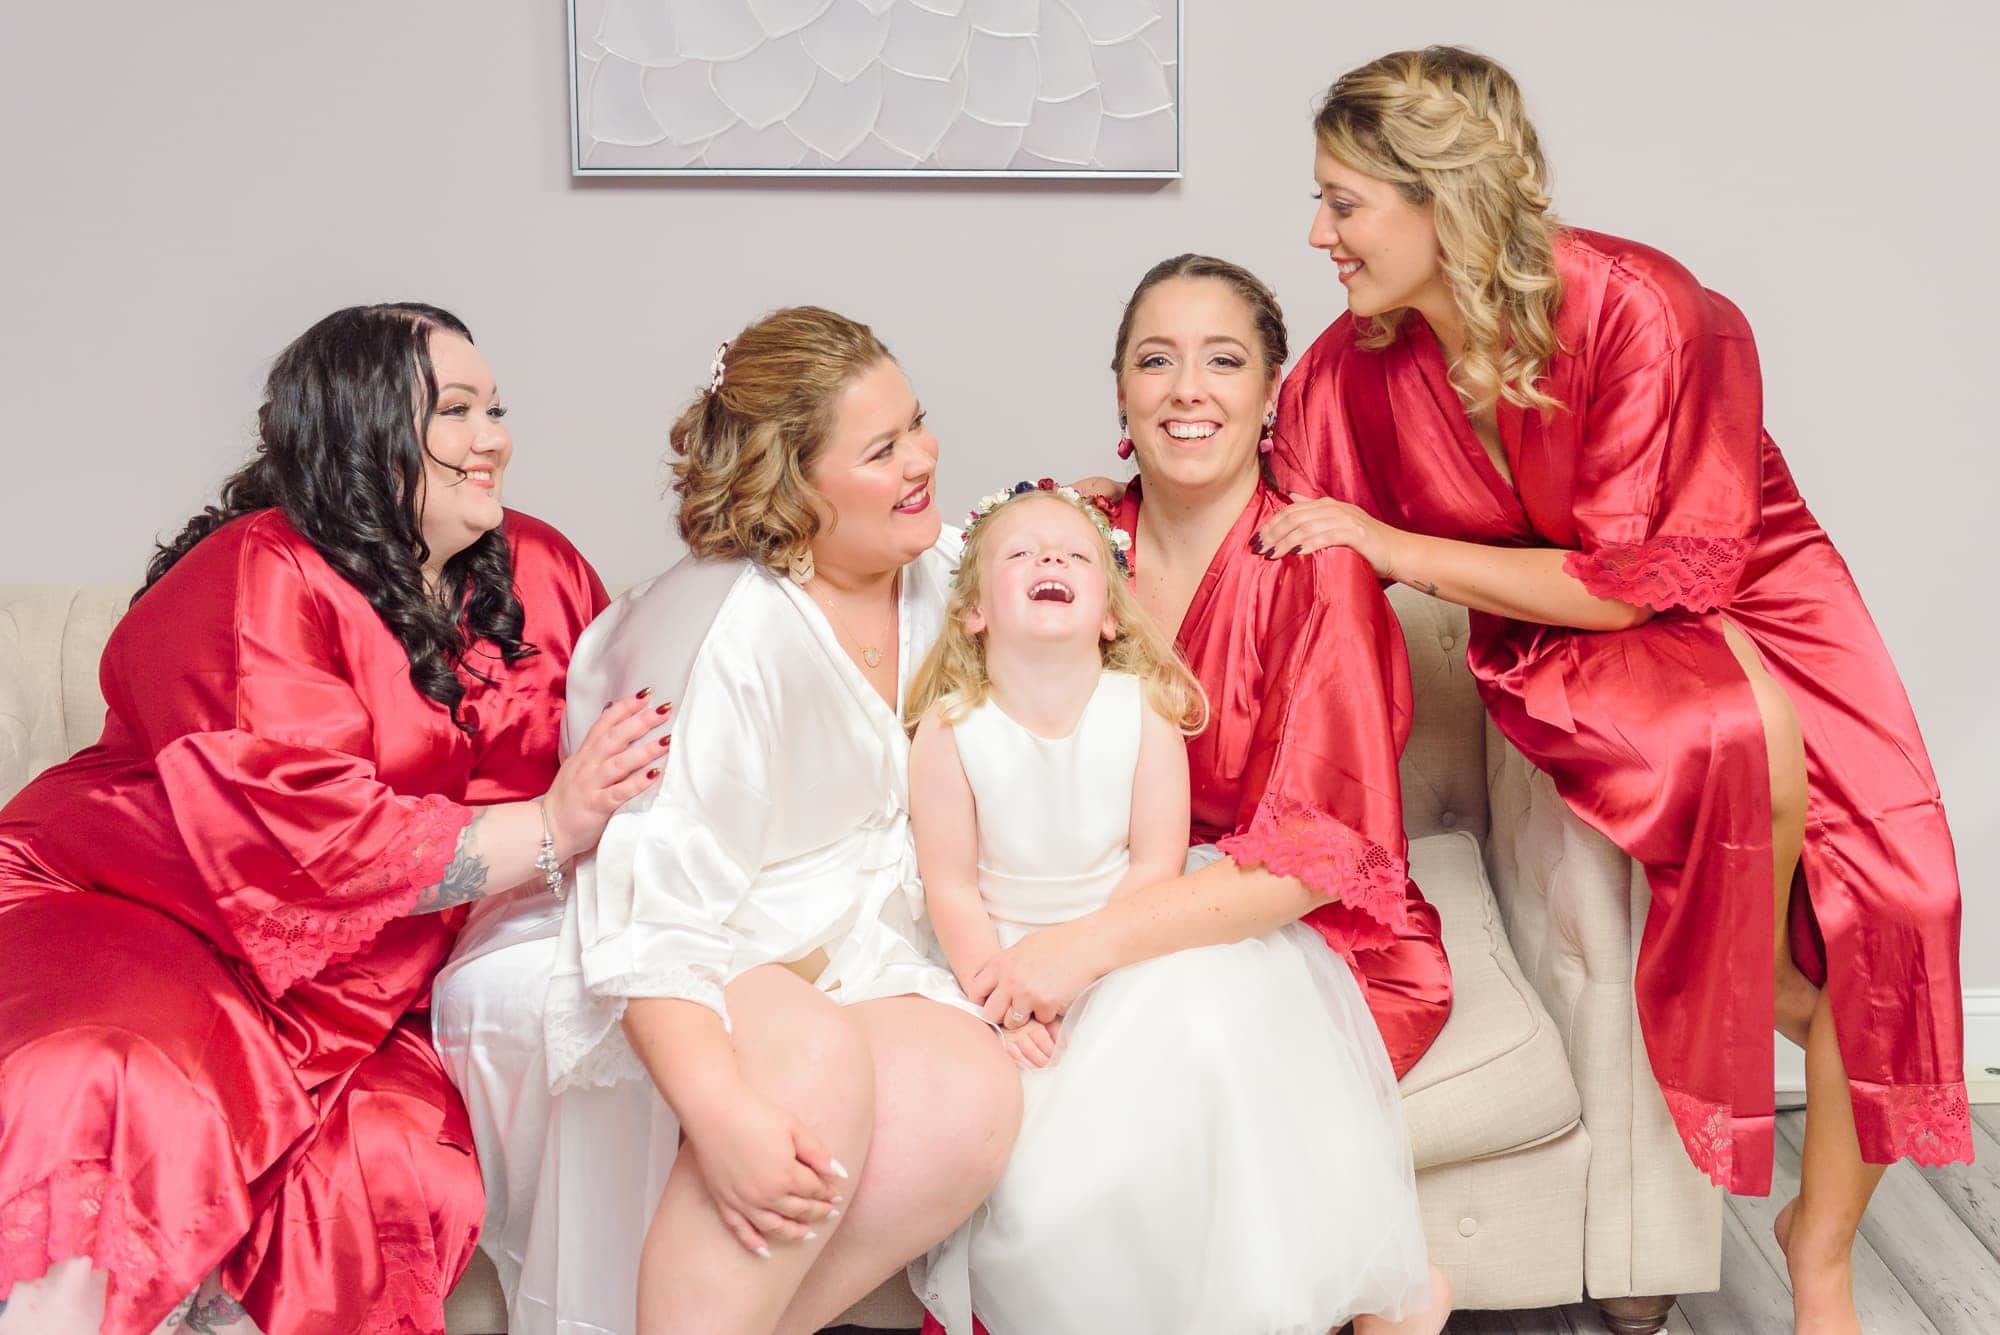 The bridesmaids hug and laugh with one another in matching robes the morning of this wedding at the Charles Mack Citizen Center.